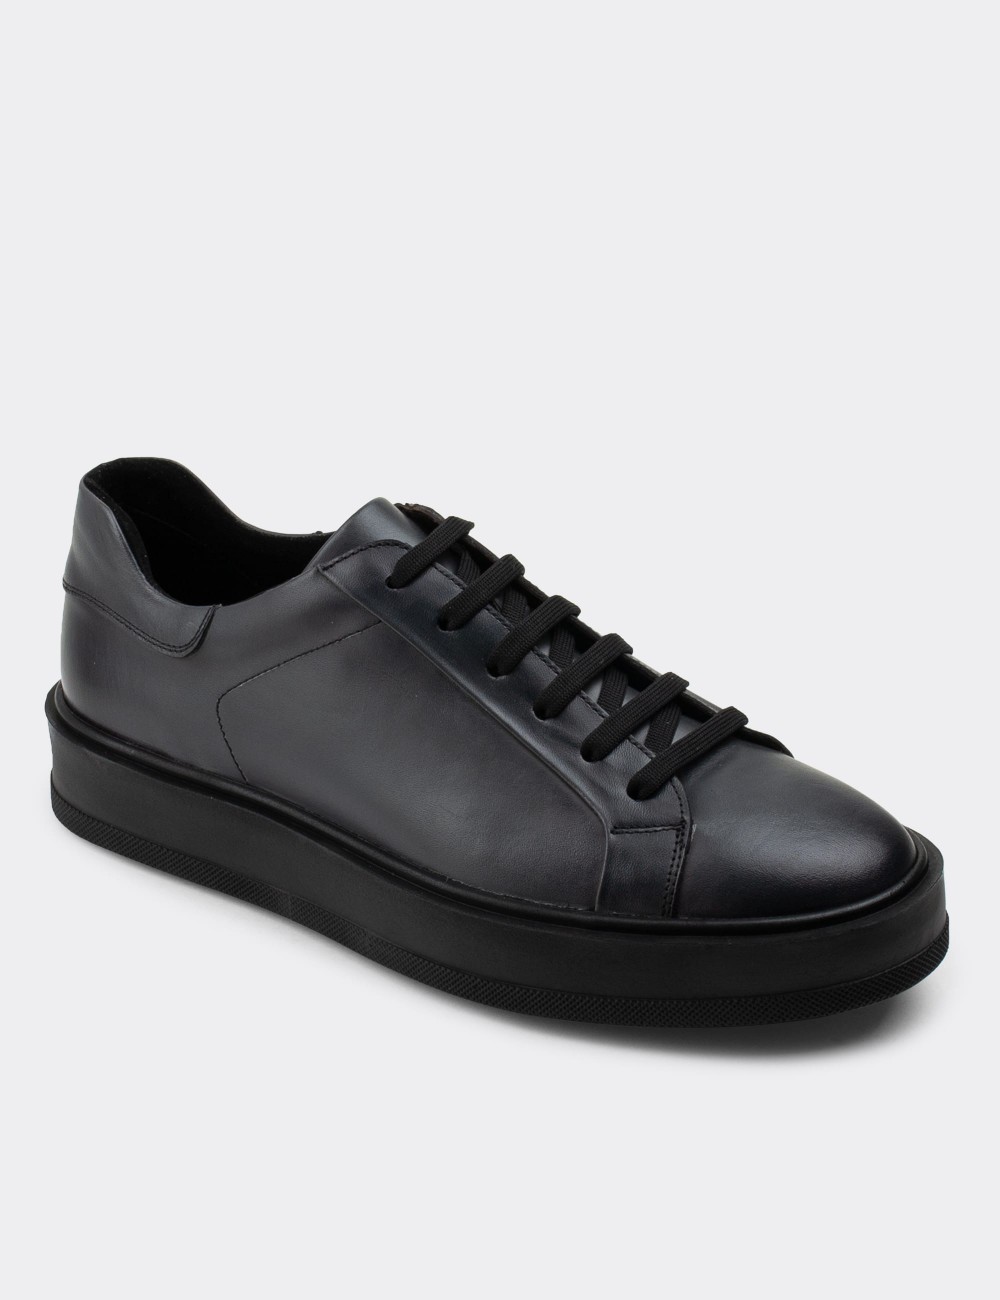 Gray  Leather Sneakers - 01829MGRIP01